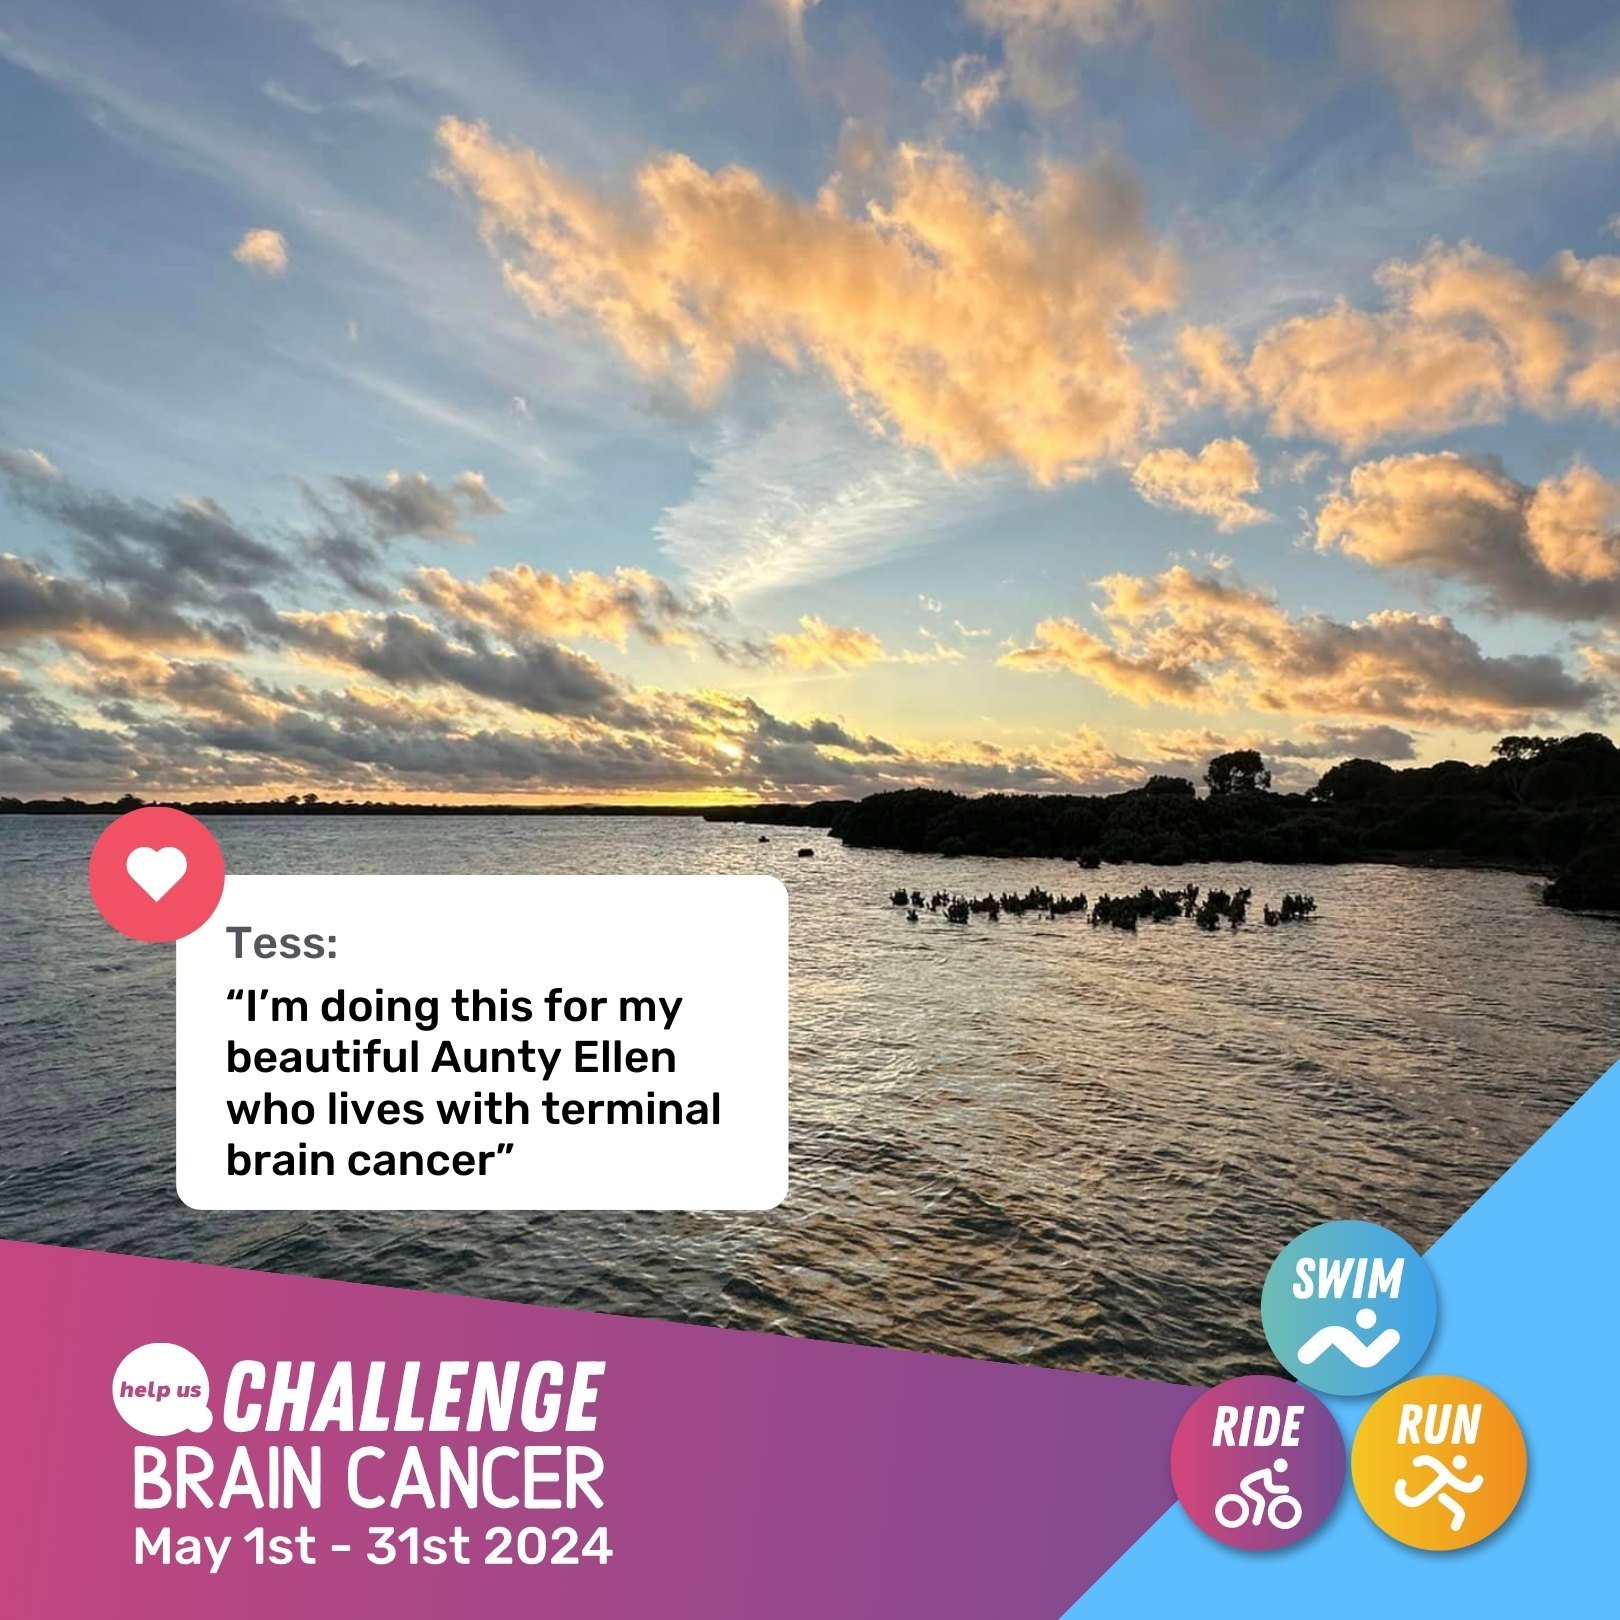 Officially one week into Challenge Brain Cancer today! Check out some of the views our challengers have been capturing as they complete their runs, swims, walks and rides. Donate or register today to help Challange Brain Cancer this May (link in bio)